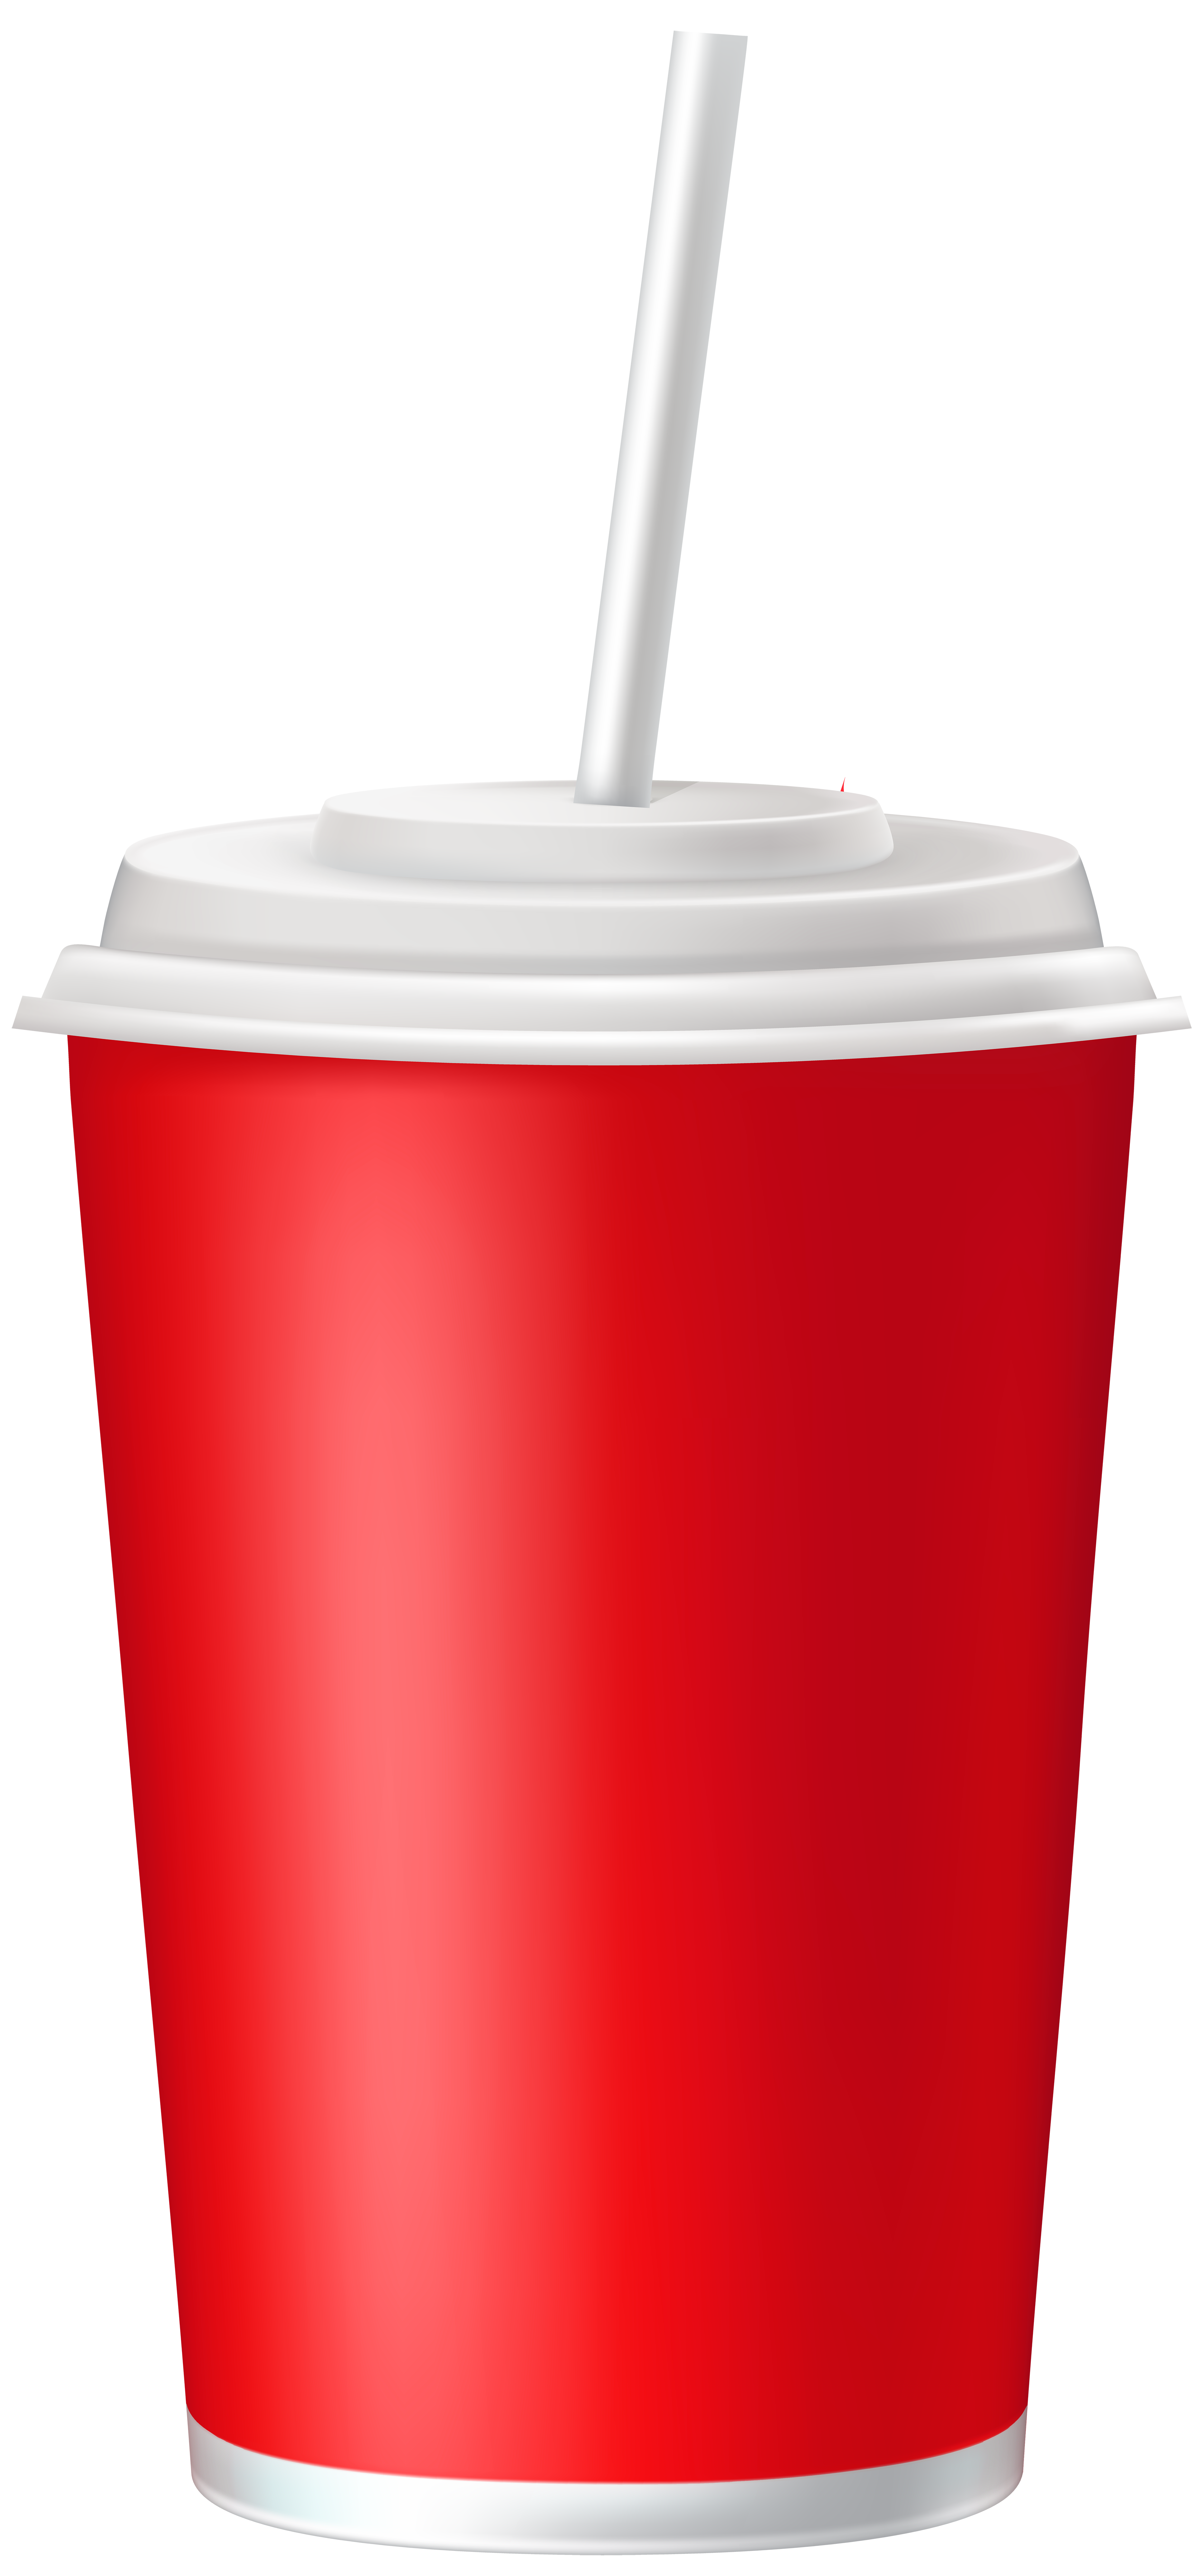 Plastic Cup with Straw PNG Clipart.